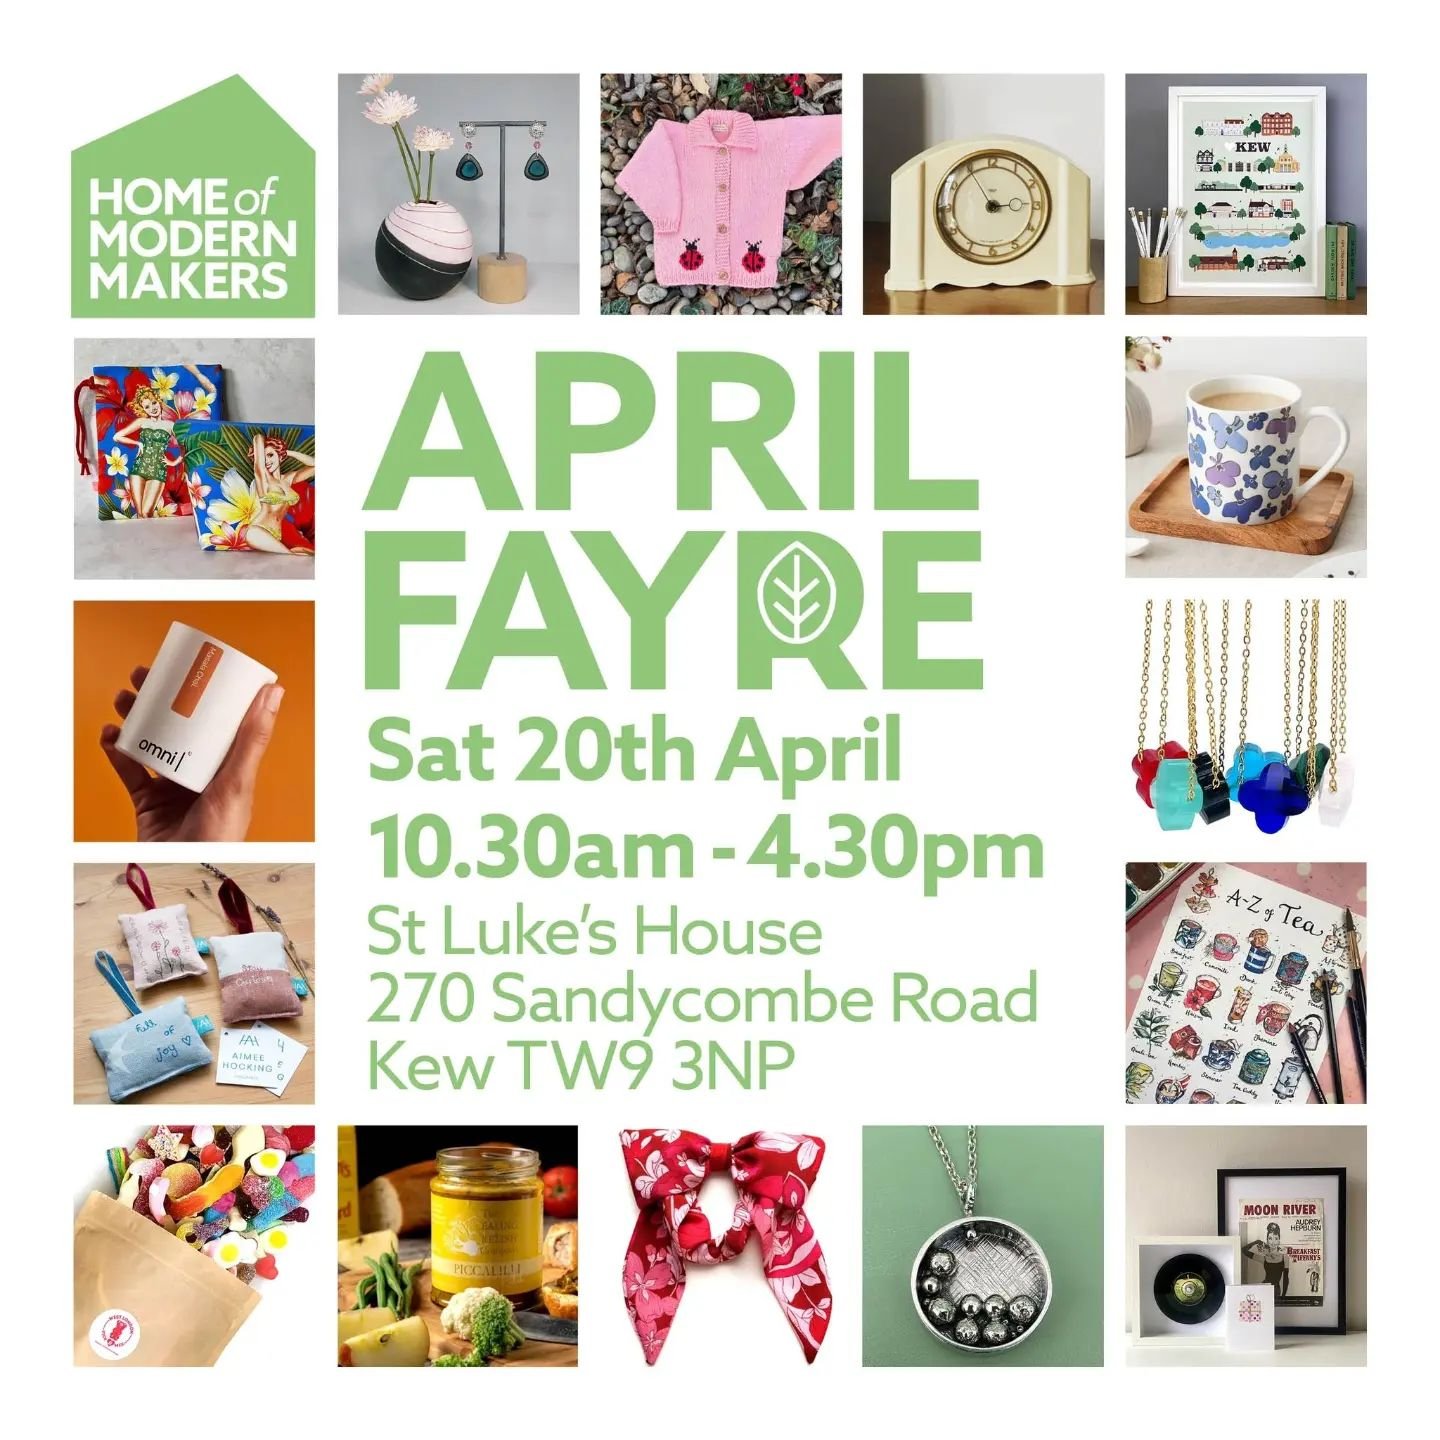 I will be joining @homeofmodernmakers in Kew for their April Fayre from 10:30am - 4:30pm. St Luke's House is a 5 minute walk from Kew Gardens station.